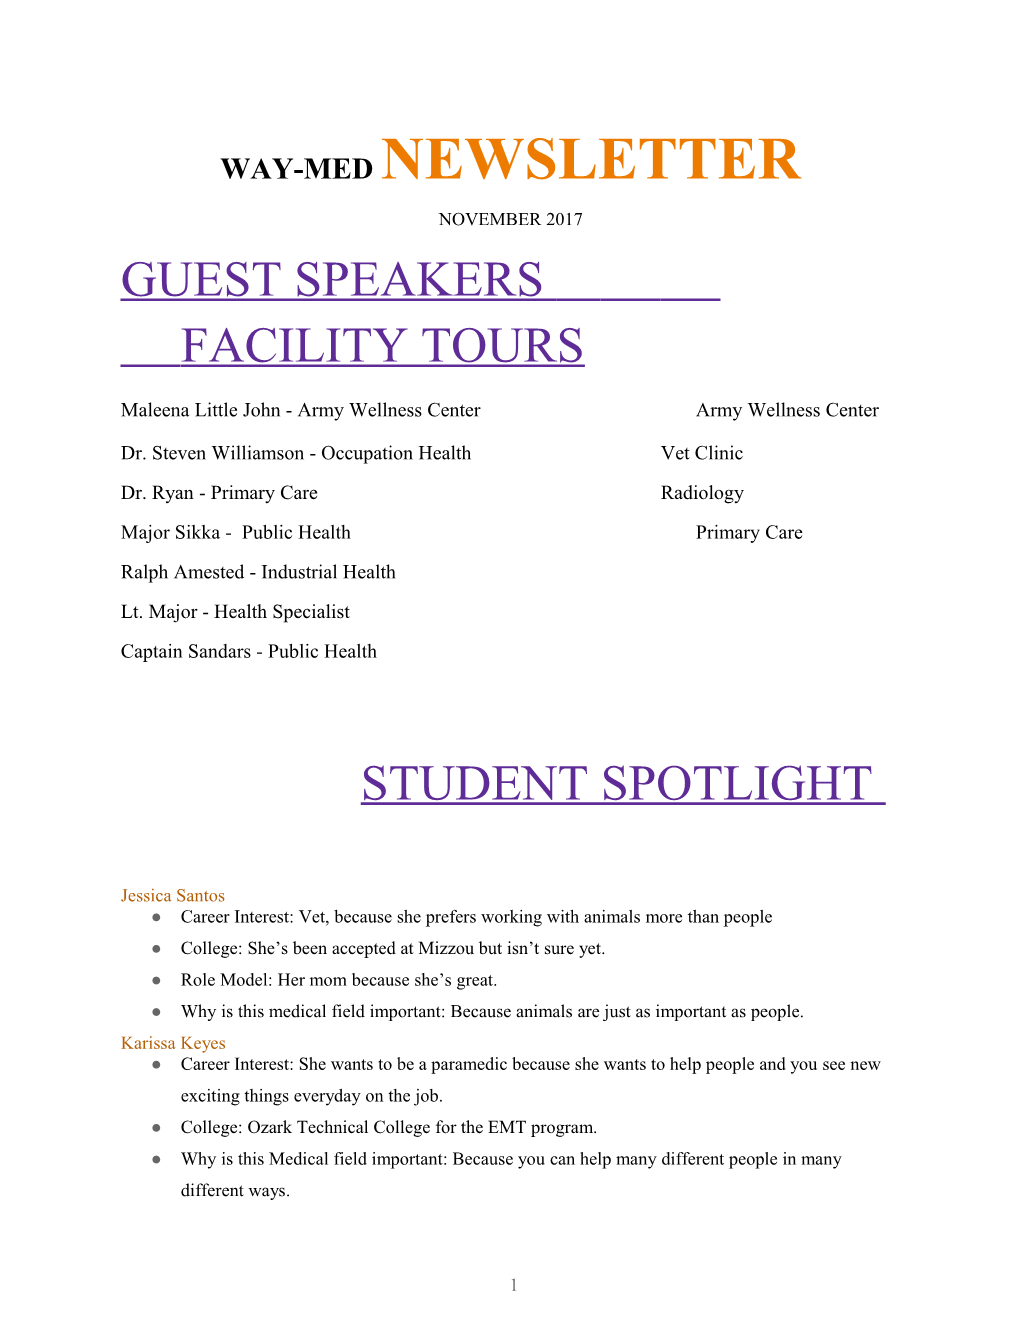 Guest Speakers Facility Tours